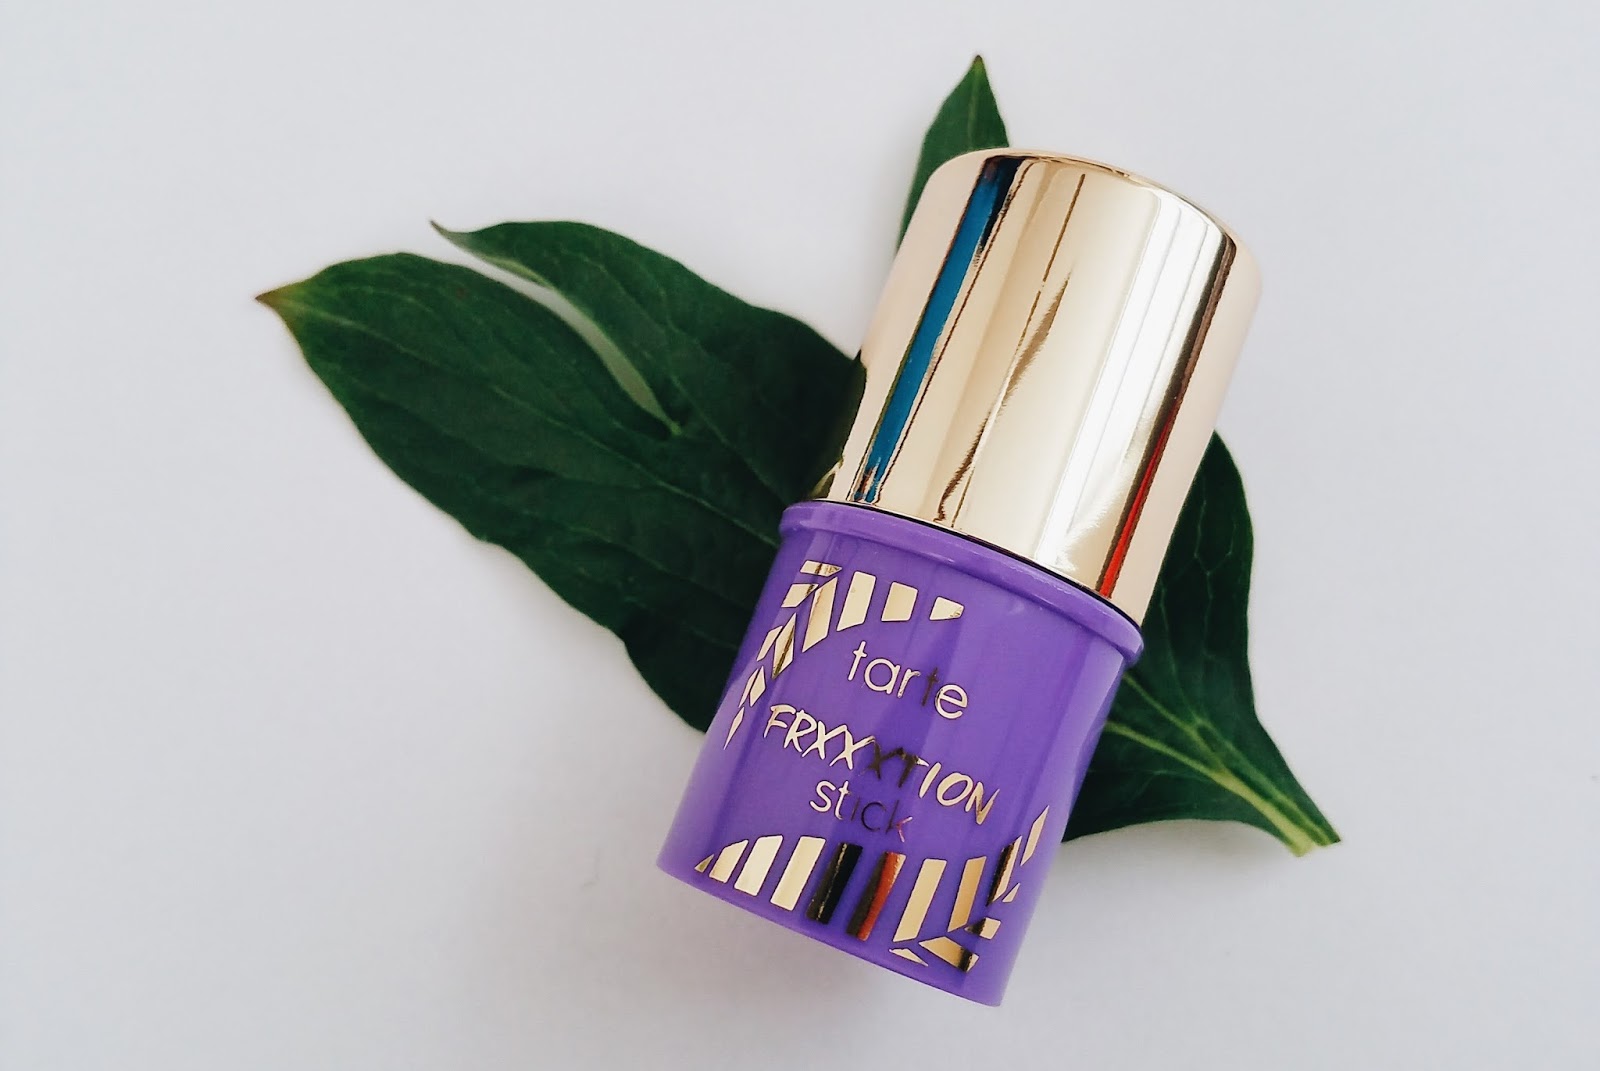 tarte FRXXXTION Stick Exfoliating Cleanser: Review by The Jen Project. This product is a great gentle exfoliator, cleanser, and mask rolled into one.